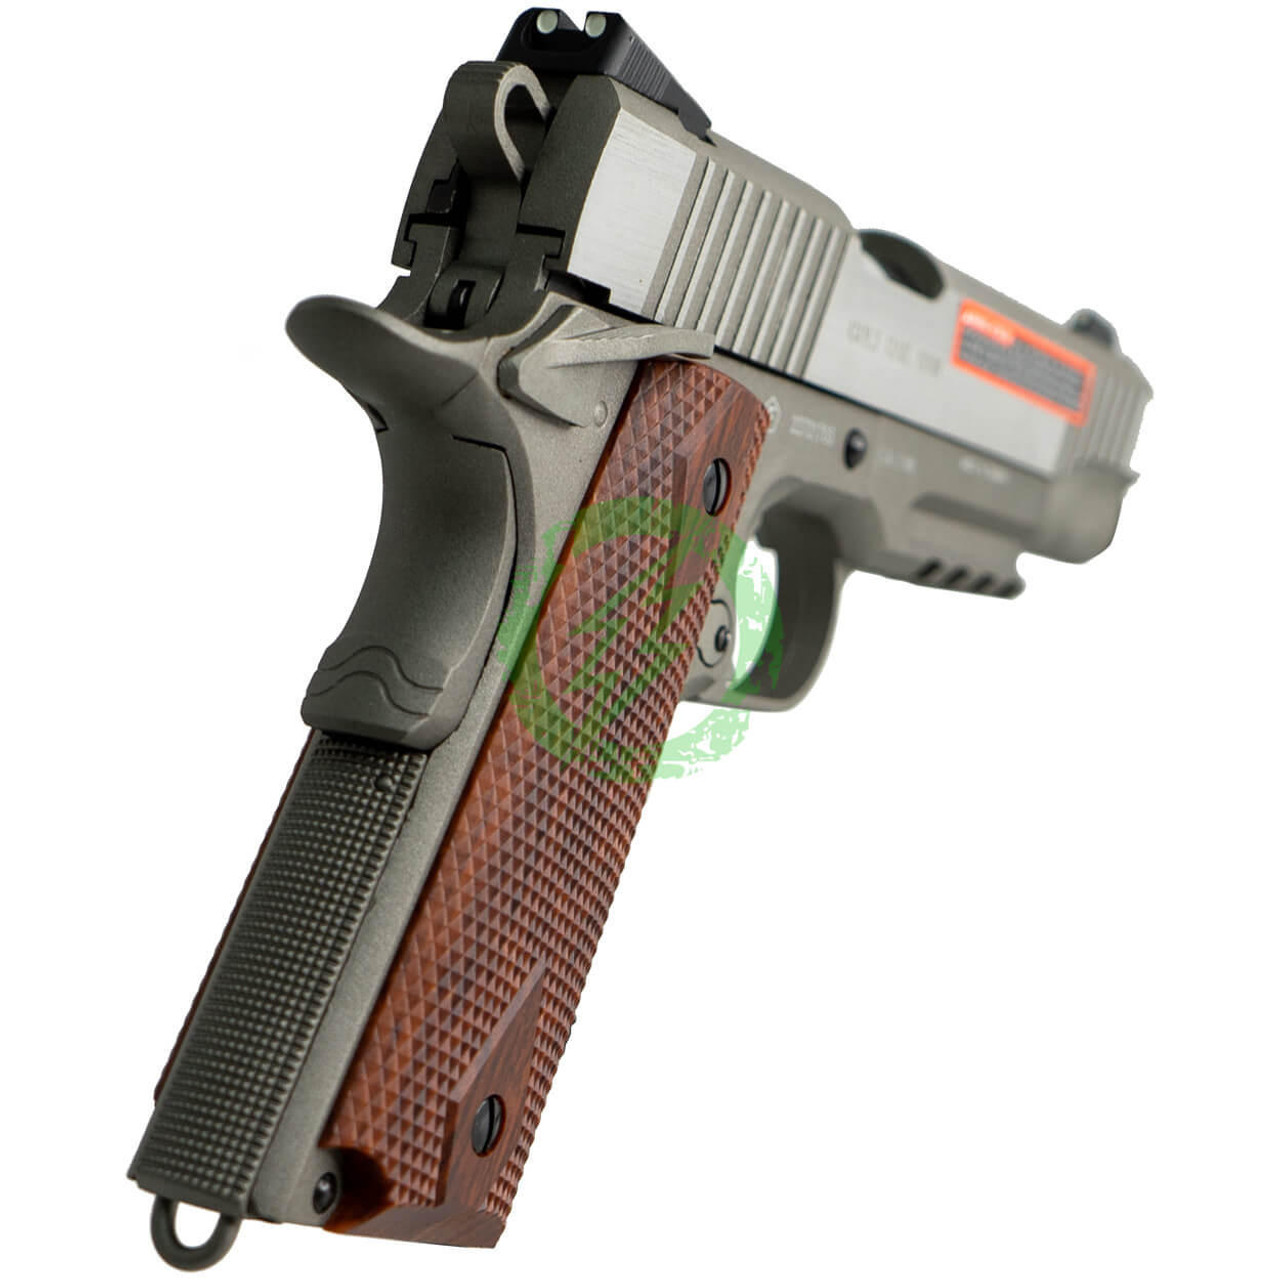  Cybergun Colt Licensed 1911 Full Metal CO2 Airsoft Gas Blowback Pistol by KWC | Stainless / Railed 